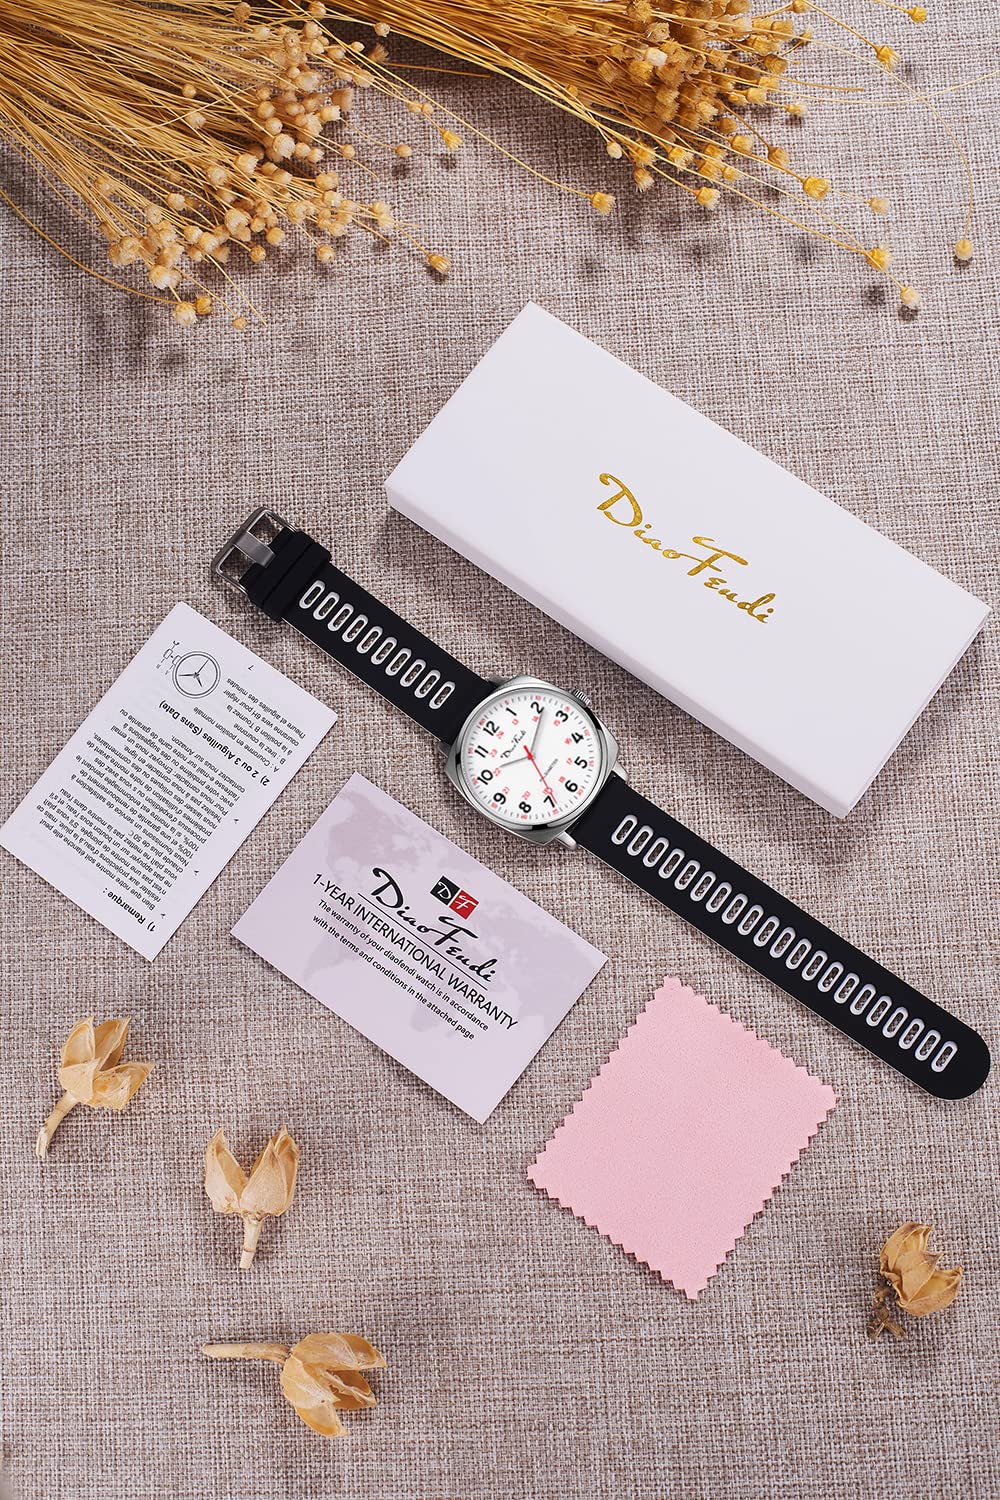 Diaofendi Nurse Watch for Medical Students,Doctors,Women Men with Second Hand and 24 Hour, Easy to Read Waterproof Watch